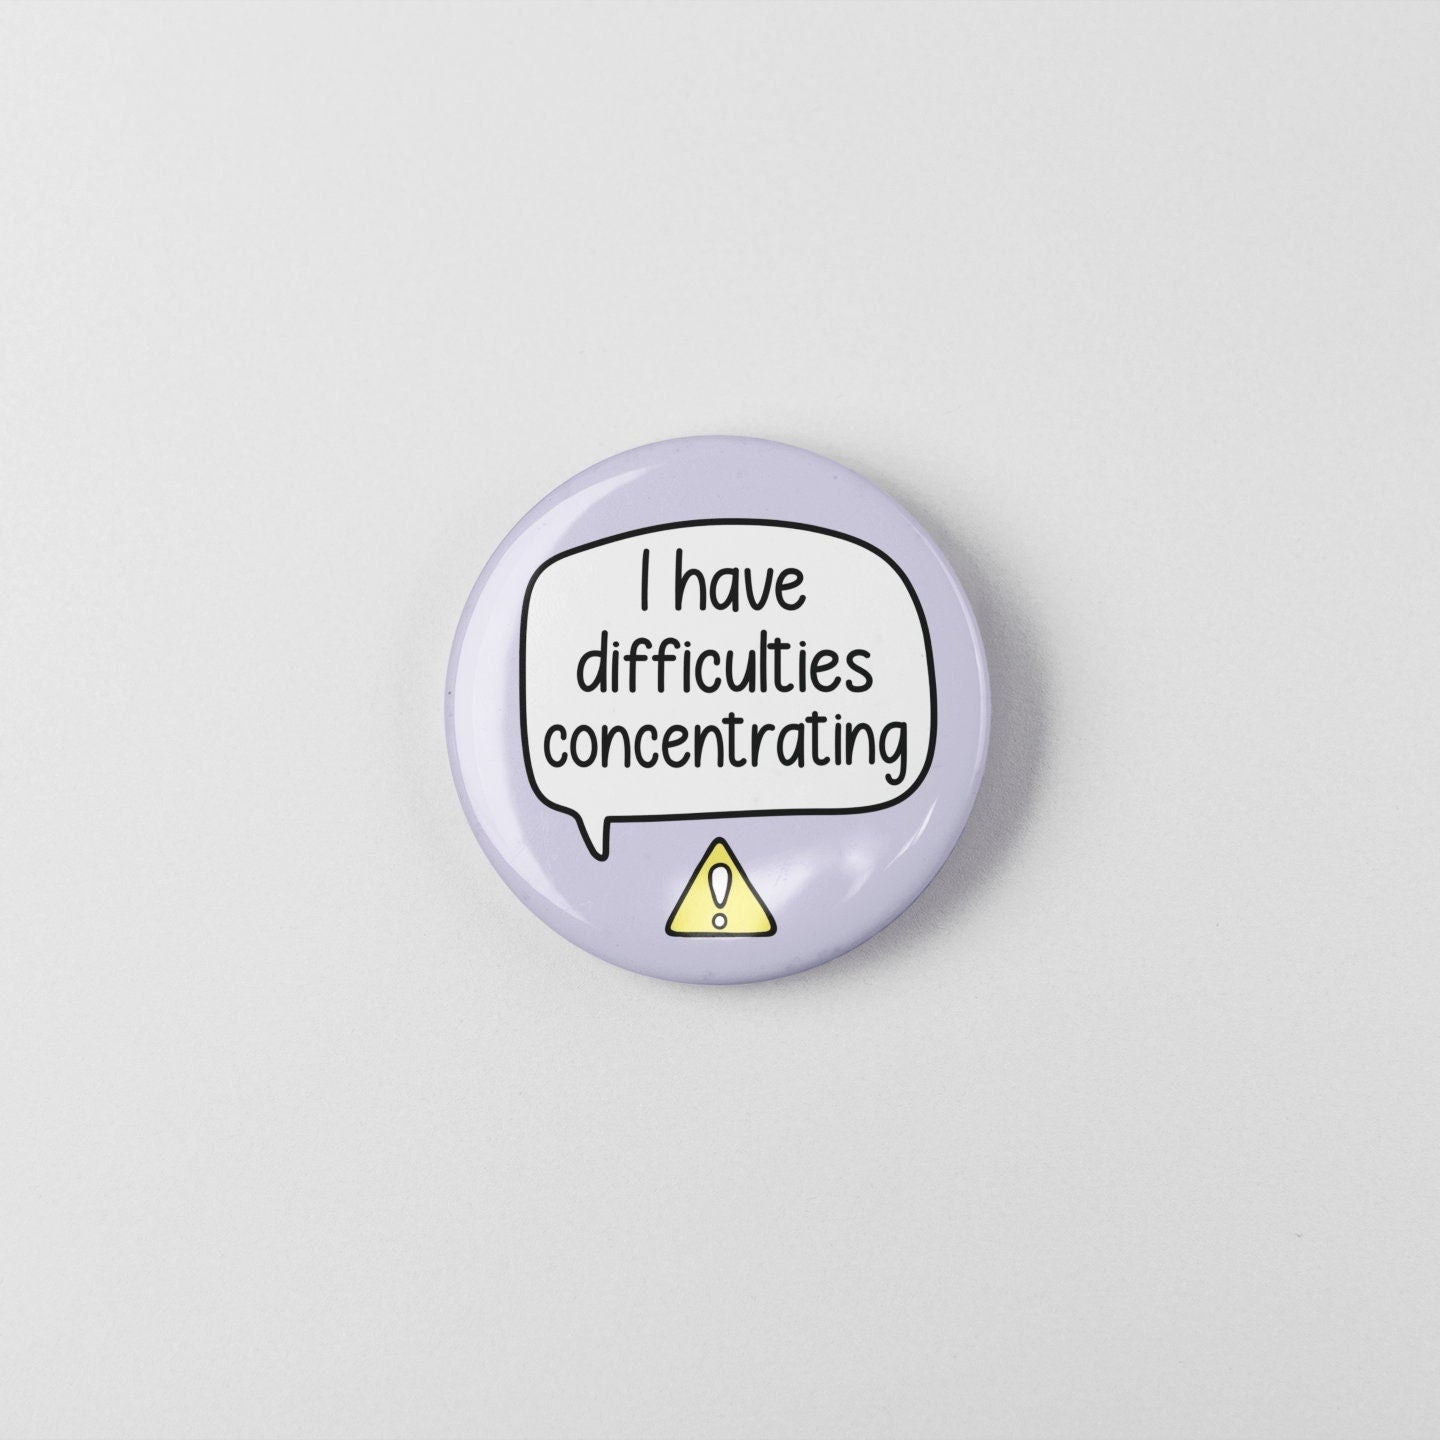 I Have Difficulties Concentrating Badge Pin | ADHD Awareness - Attention Deficit